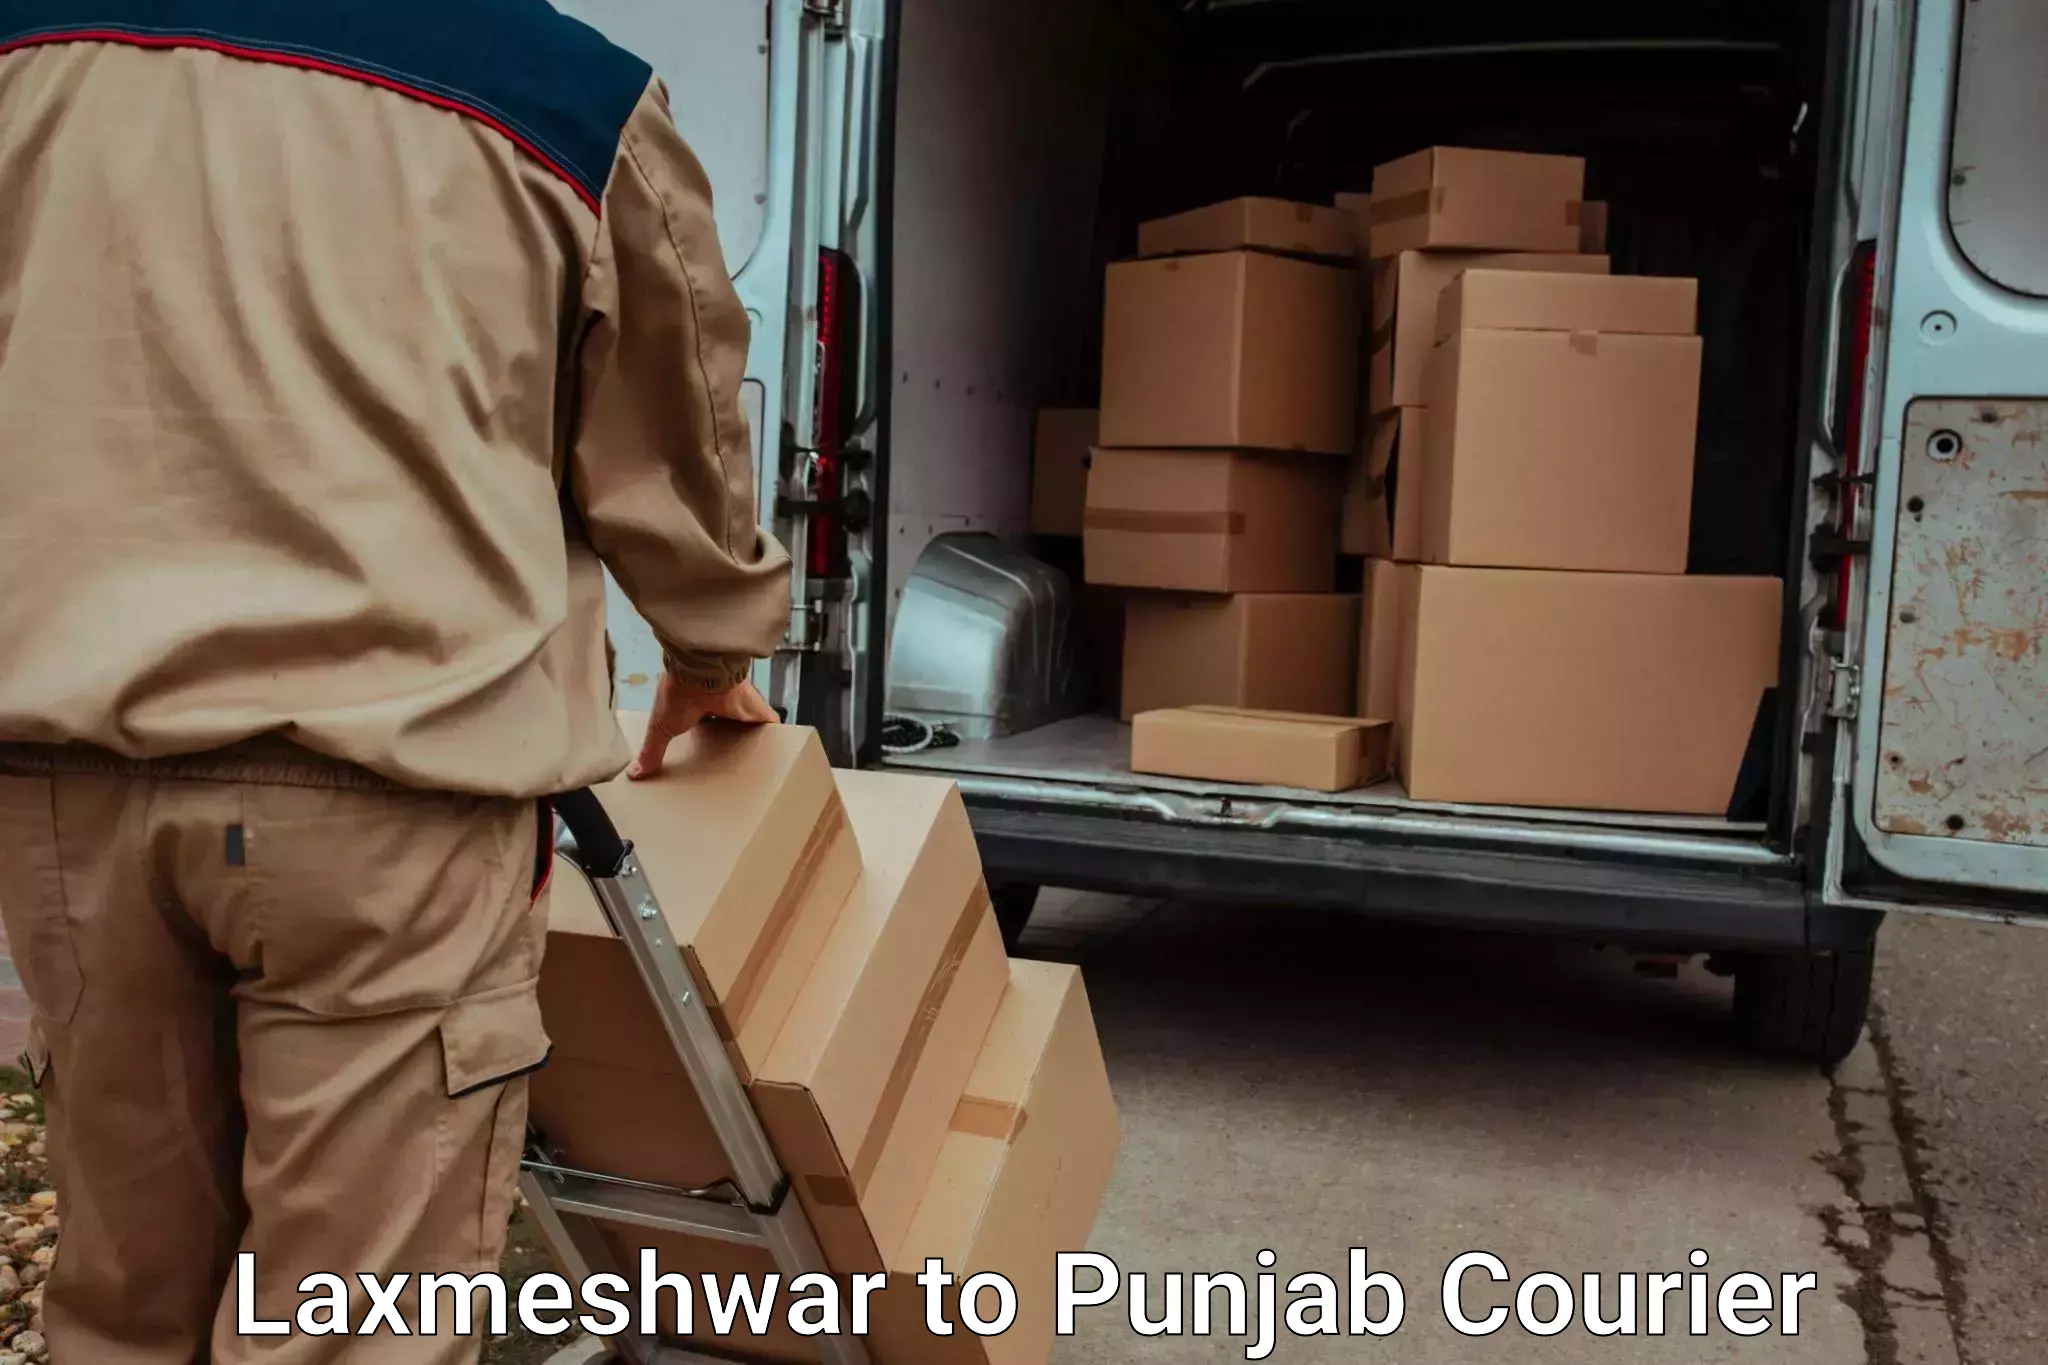 Baggage relocation service Laxmeshwar to Dhilwan